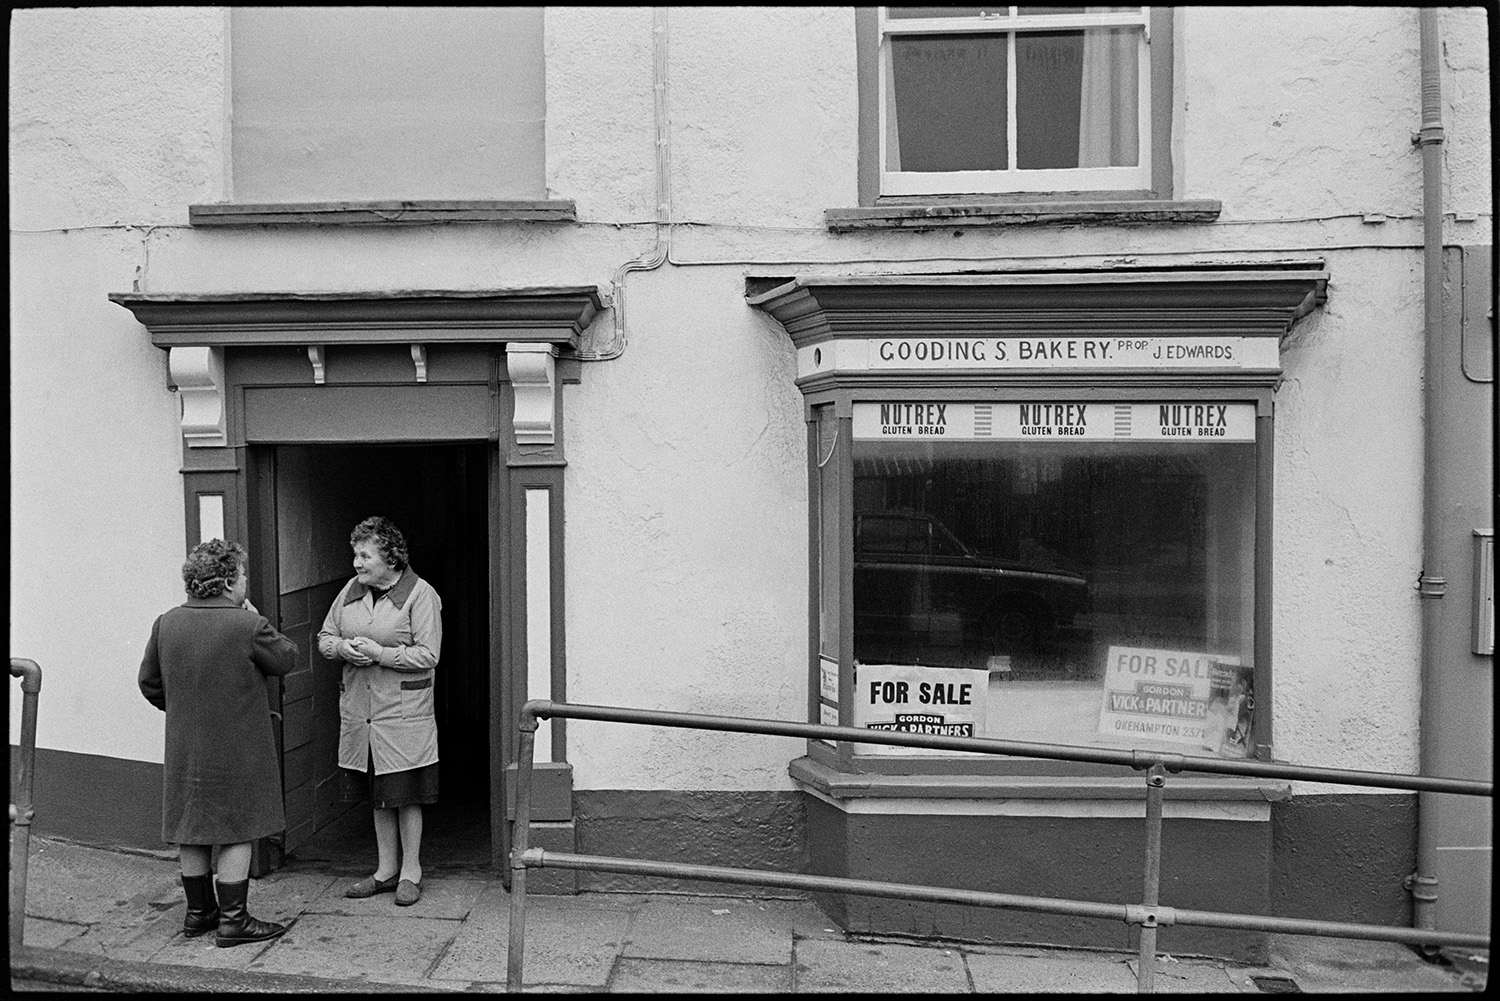 Women chatting at door of baker's shop. 
[Two women talking outside the shop front of Gooding's Bakery in Market Street, Hatherleigh. For Sale signs are up in the bakery window.]